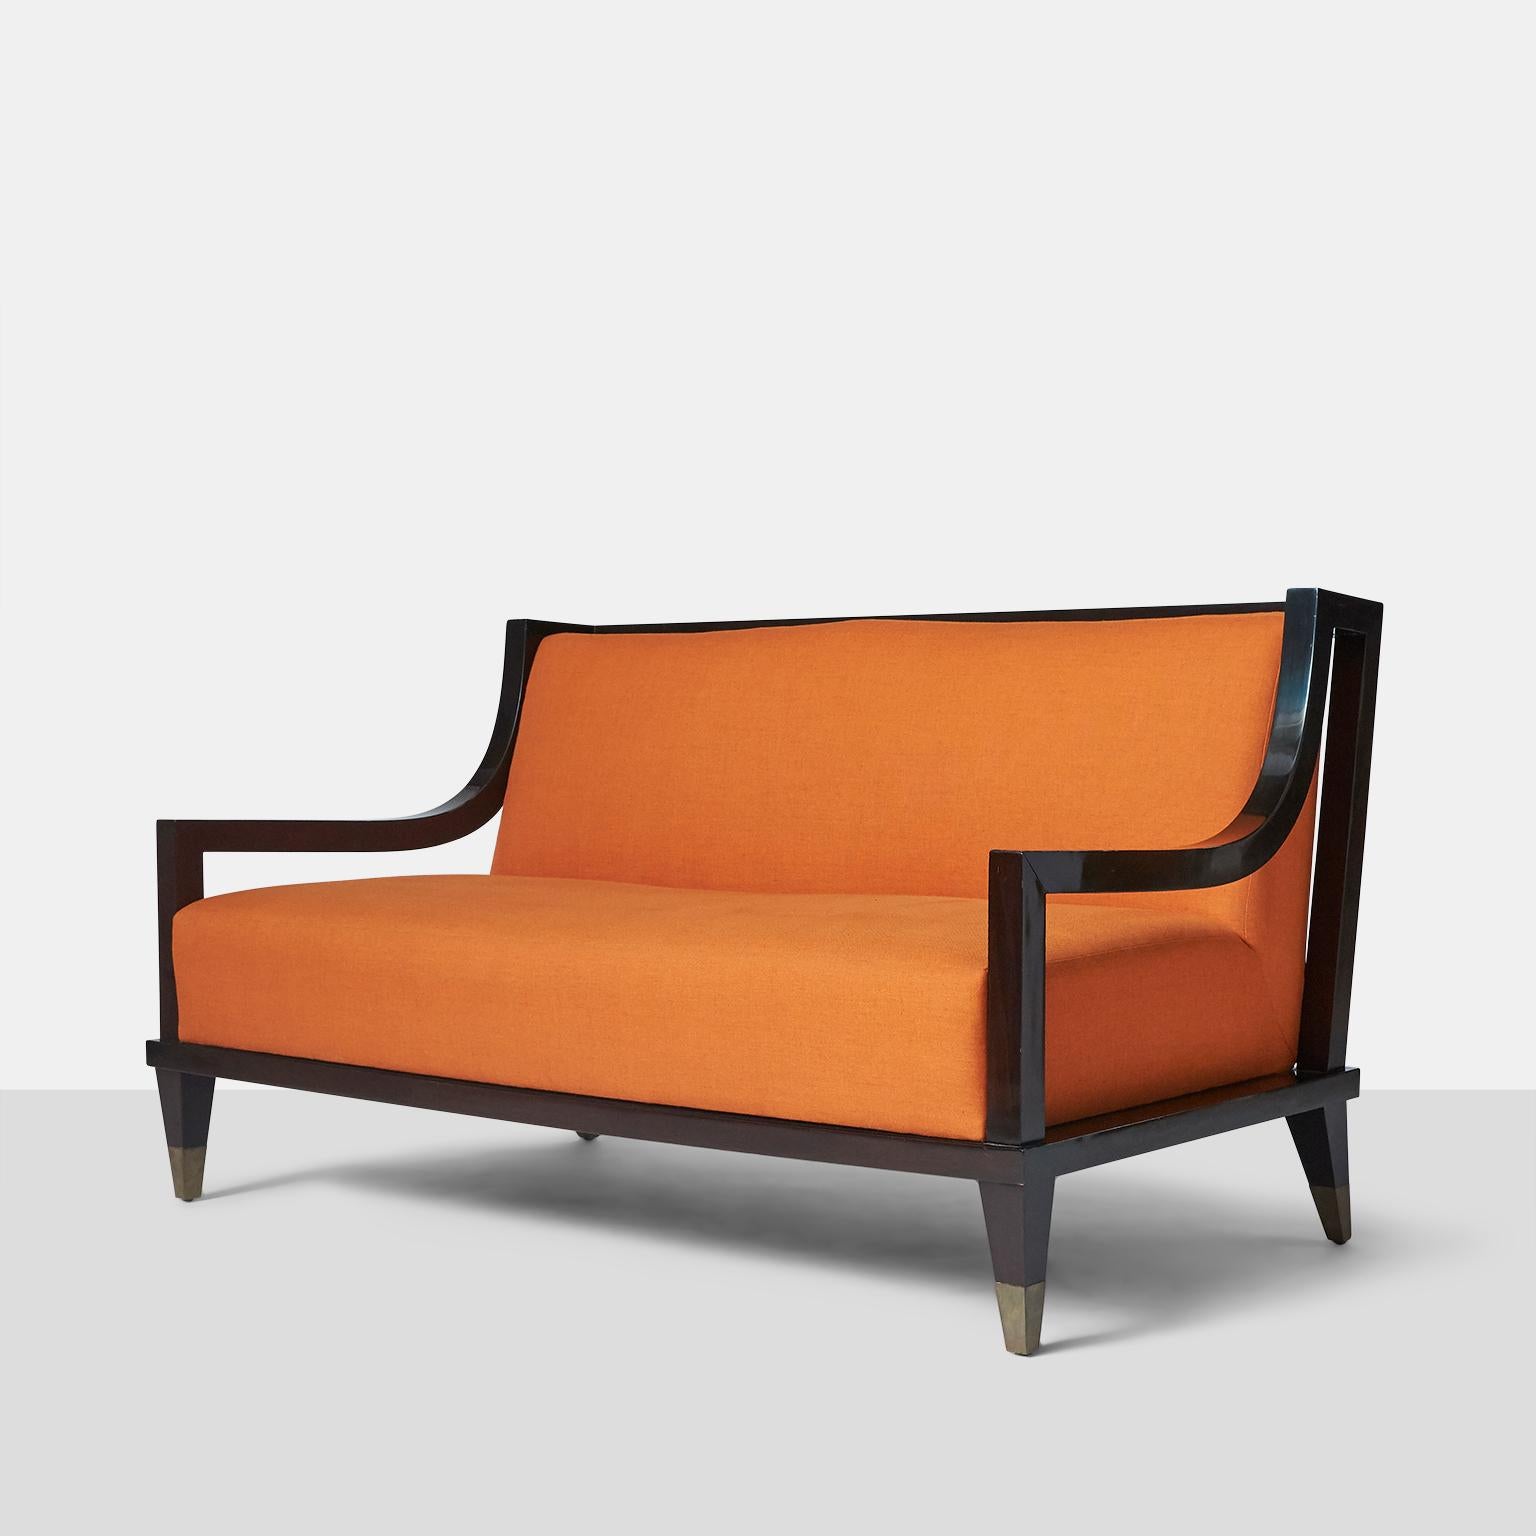 Settee by Mito Block Brothers.
A signature style settee by the Mito Block Brothers in Mexico City made in ebonized mahogany and square form brass caps on each leg. The back features a horizontal ladder back design with the upholstery being a